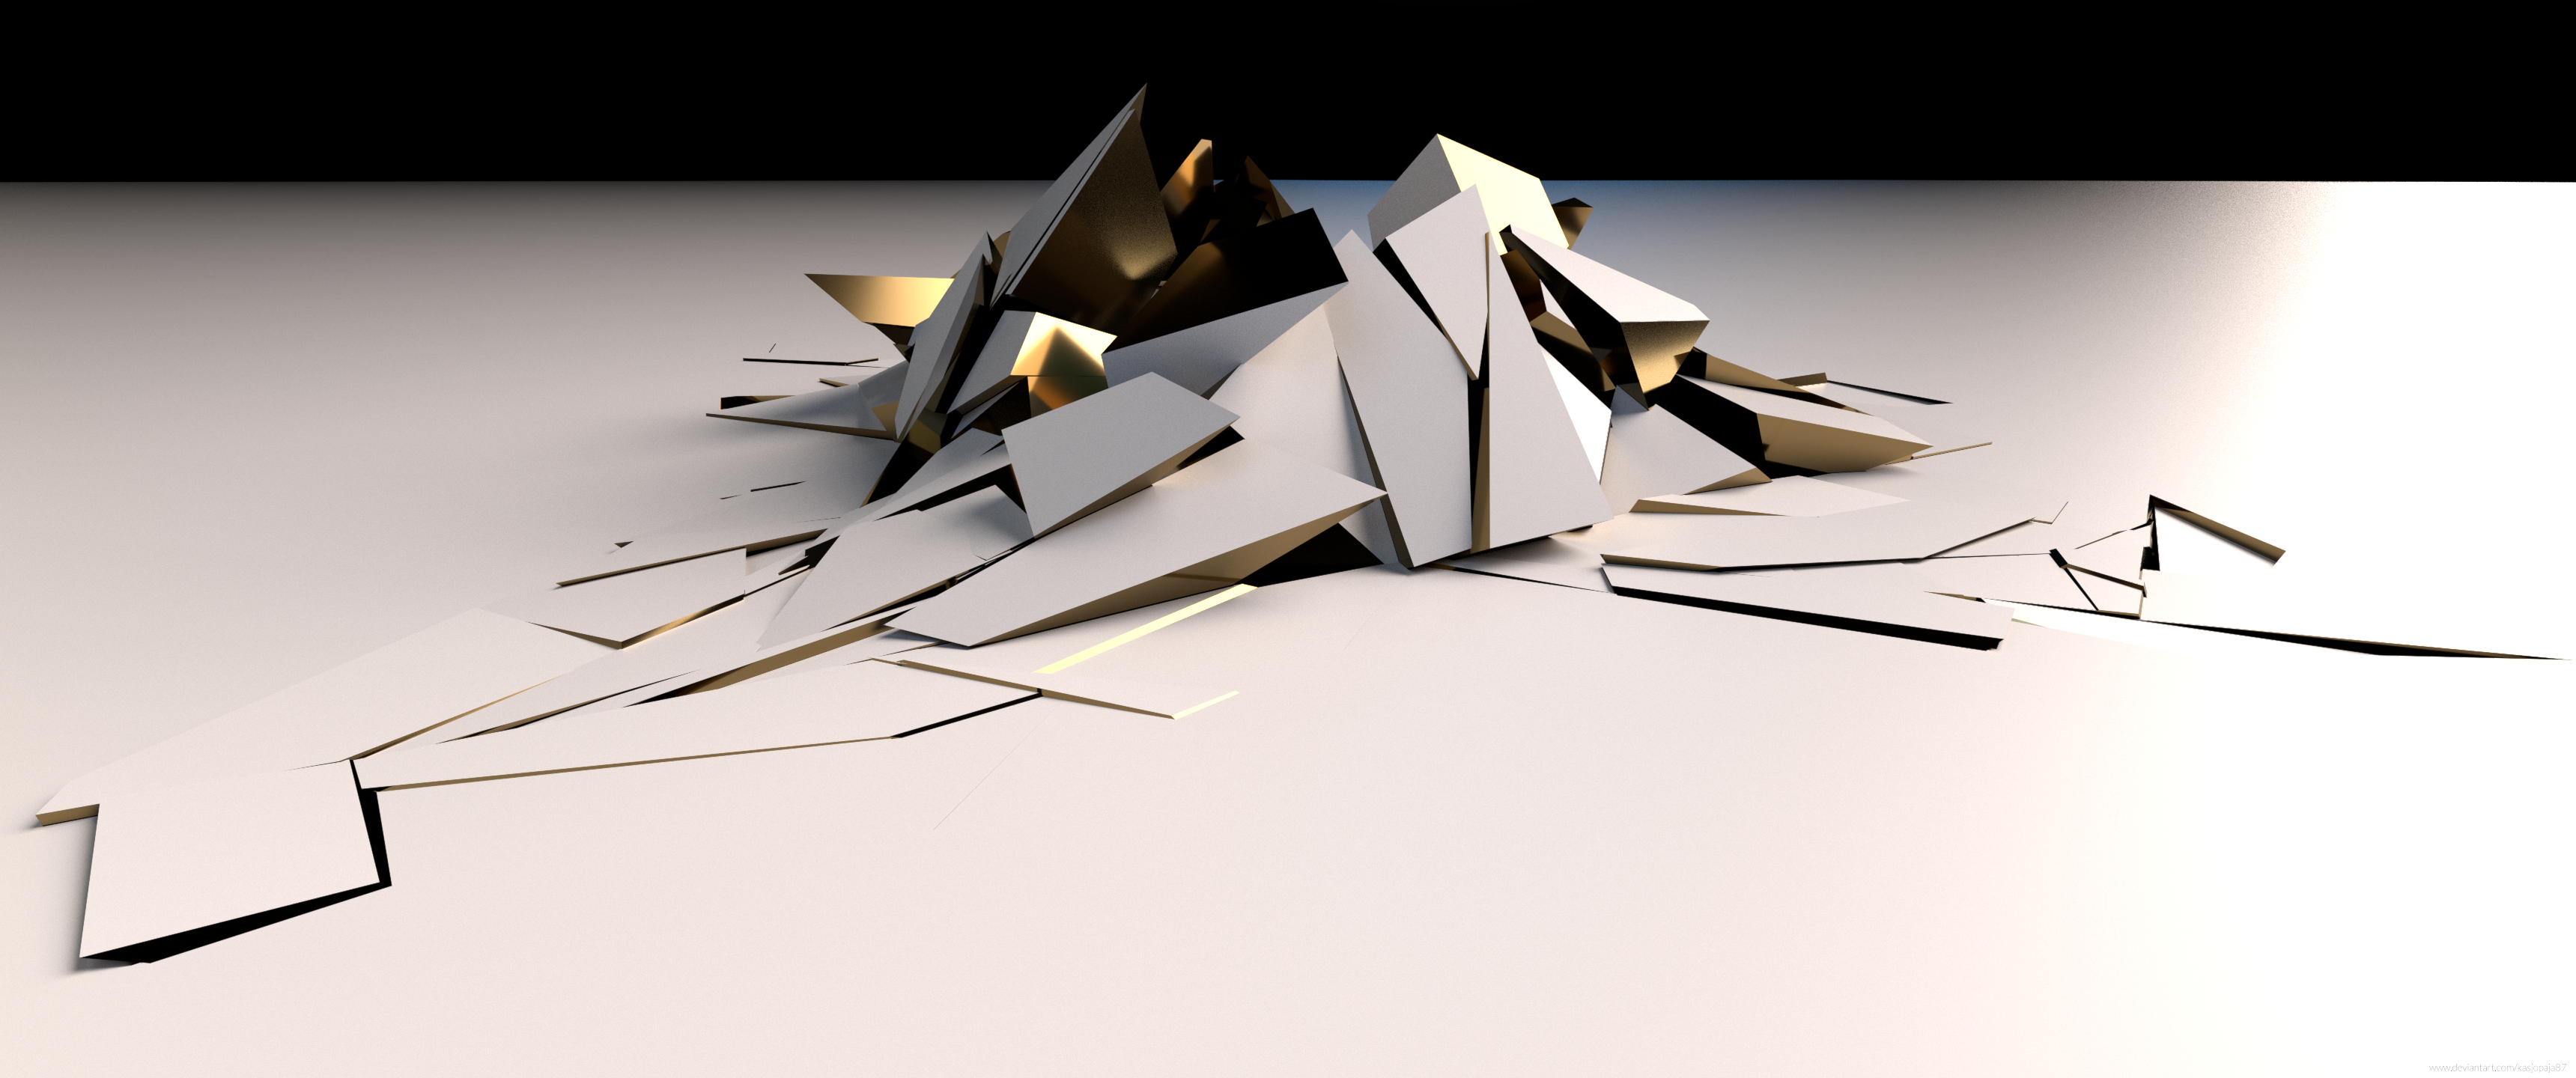 General 3440x1440 Cinema 4D white abstract 3D Abstract CGI digital art